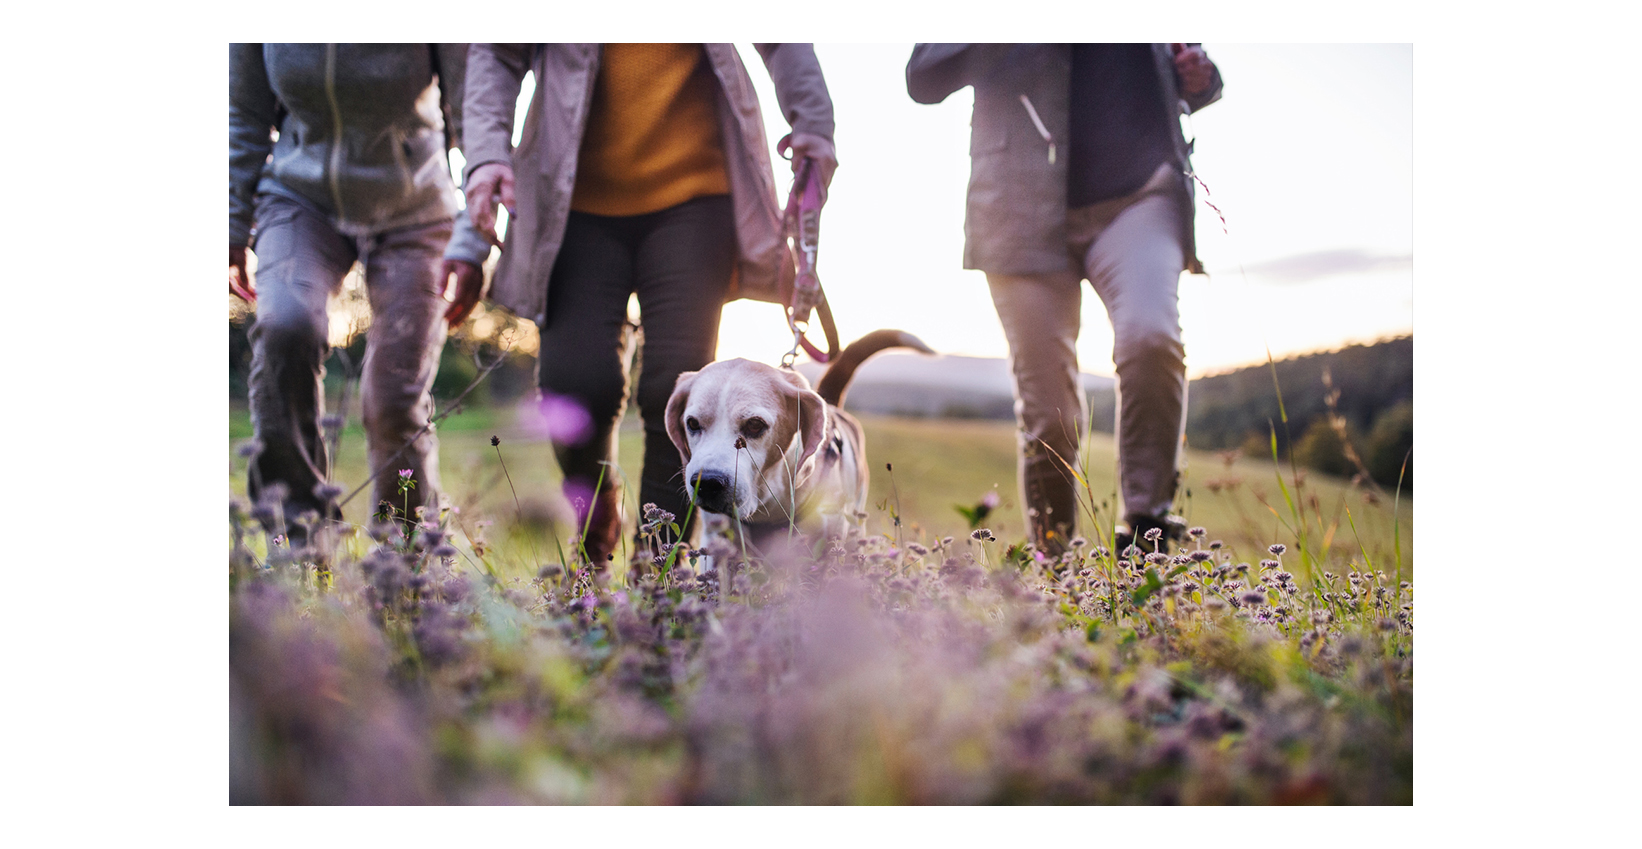 3 people taking a walk in a meadow with a puppy